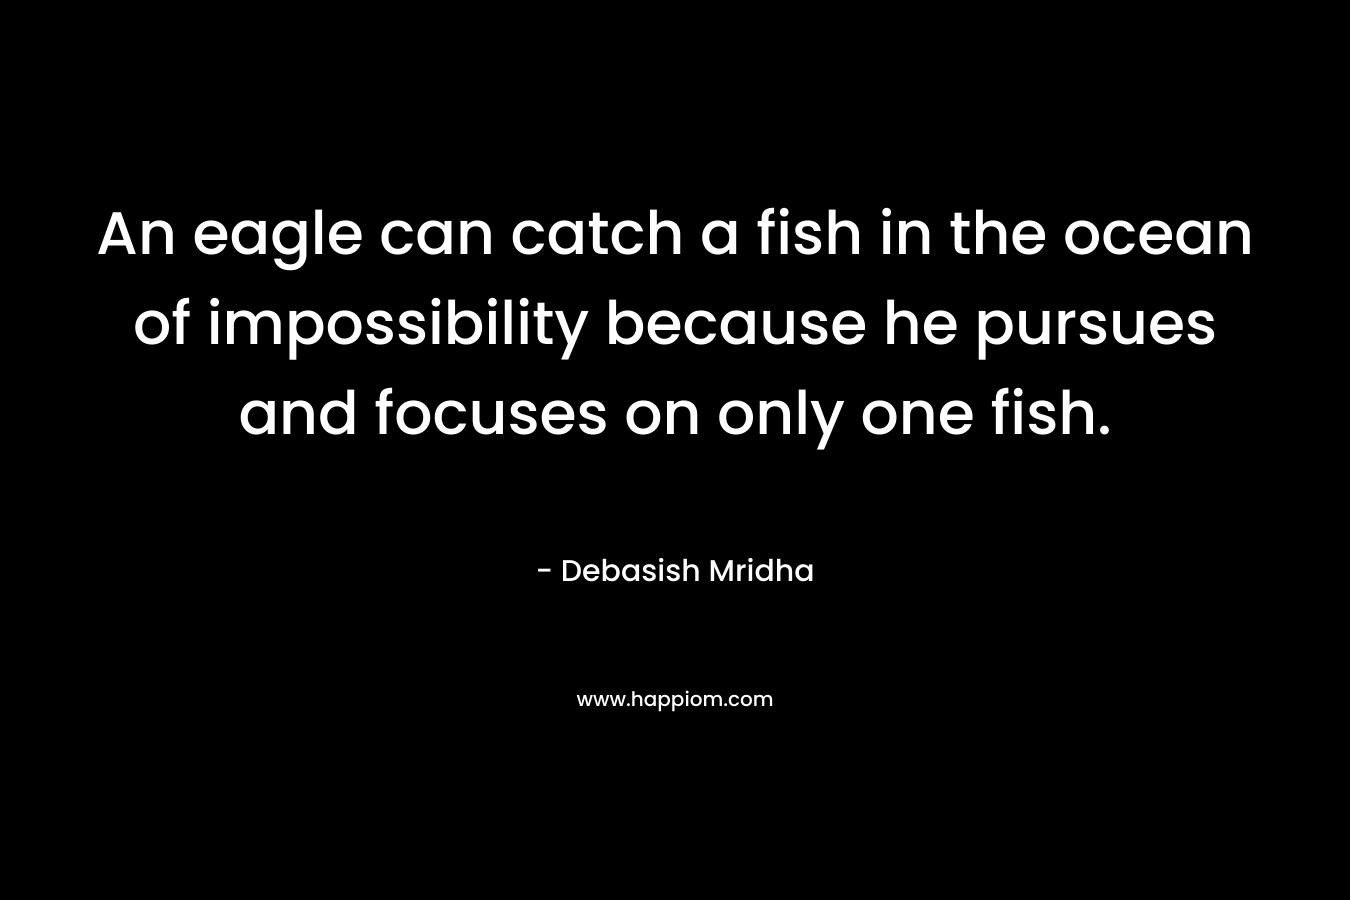 An eagle can catch a fish in the ocean of impossibility because he pursues and focuses on only one fish.